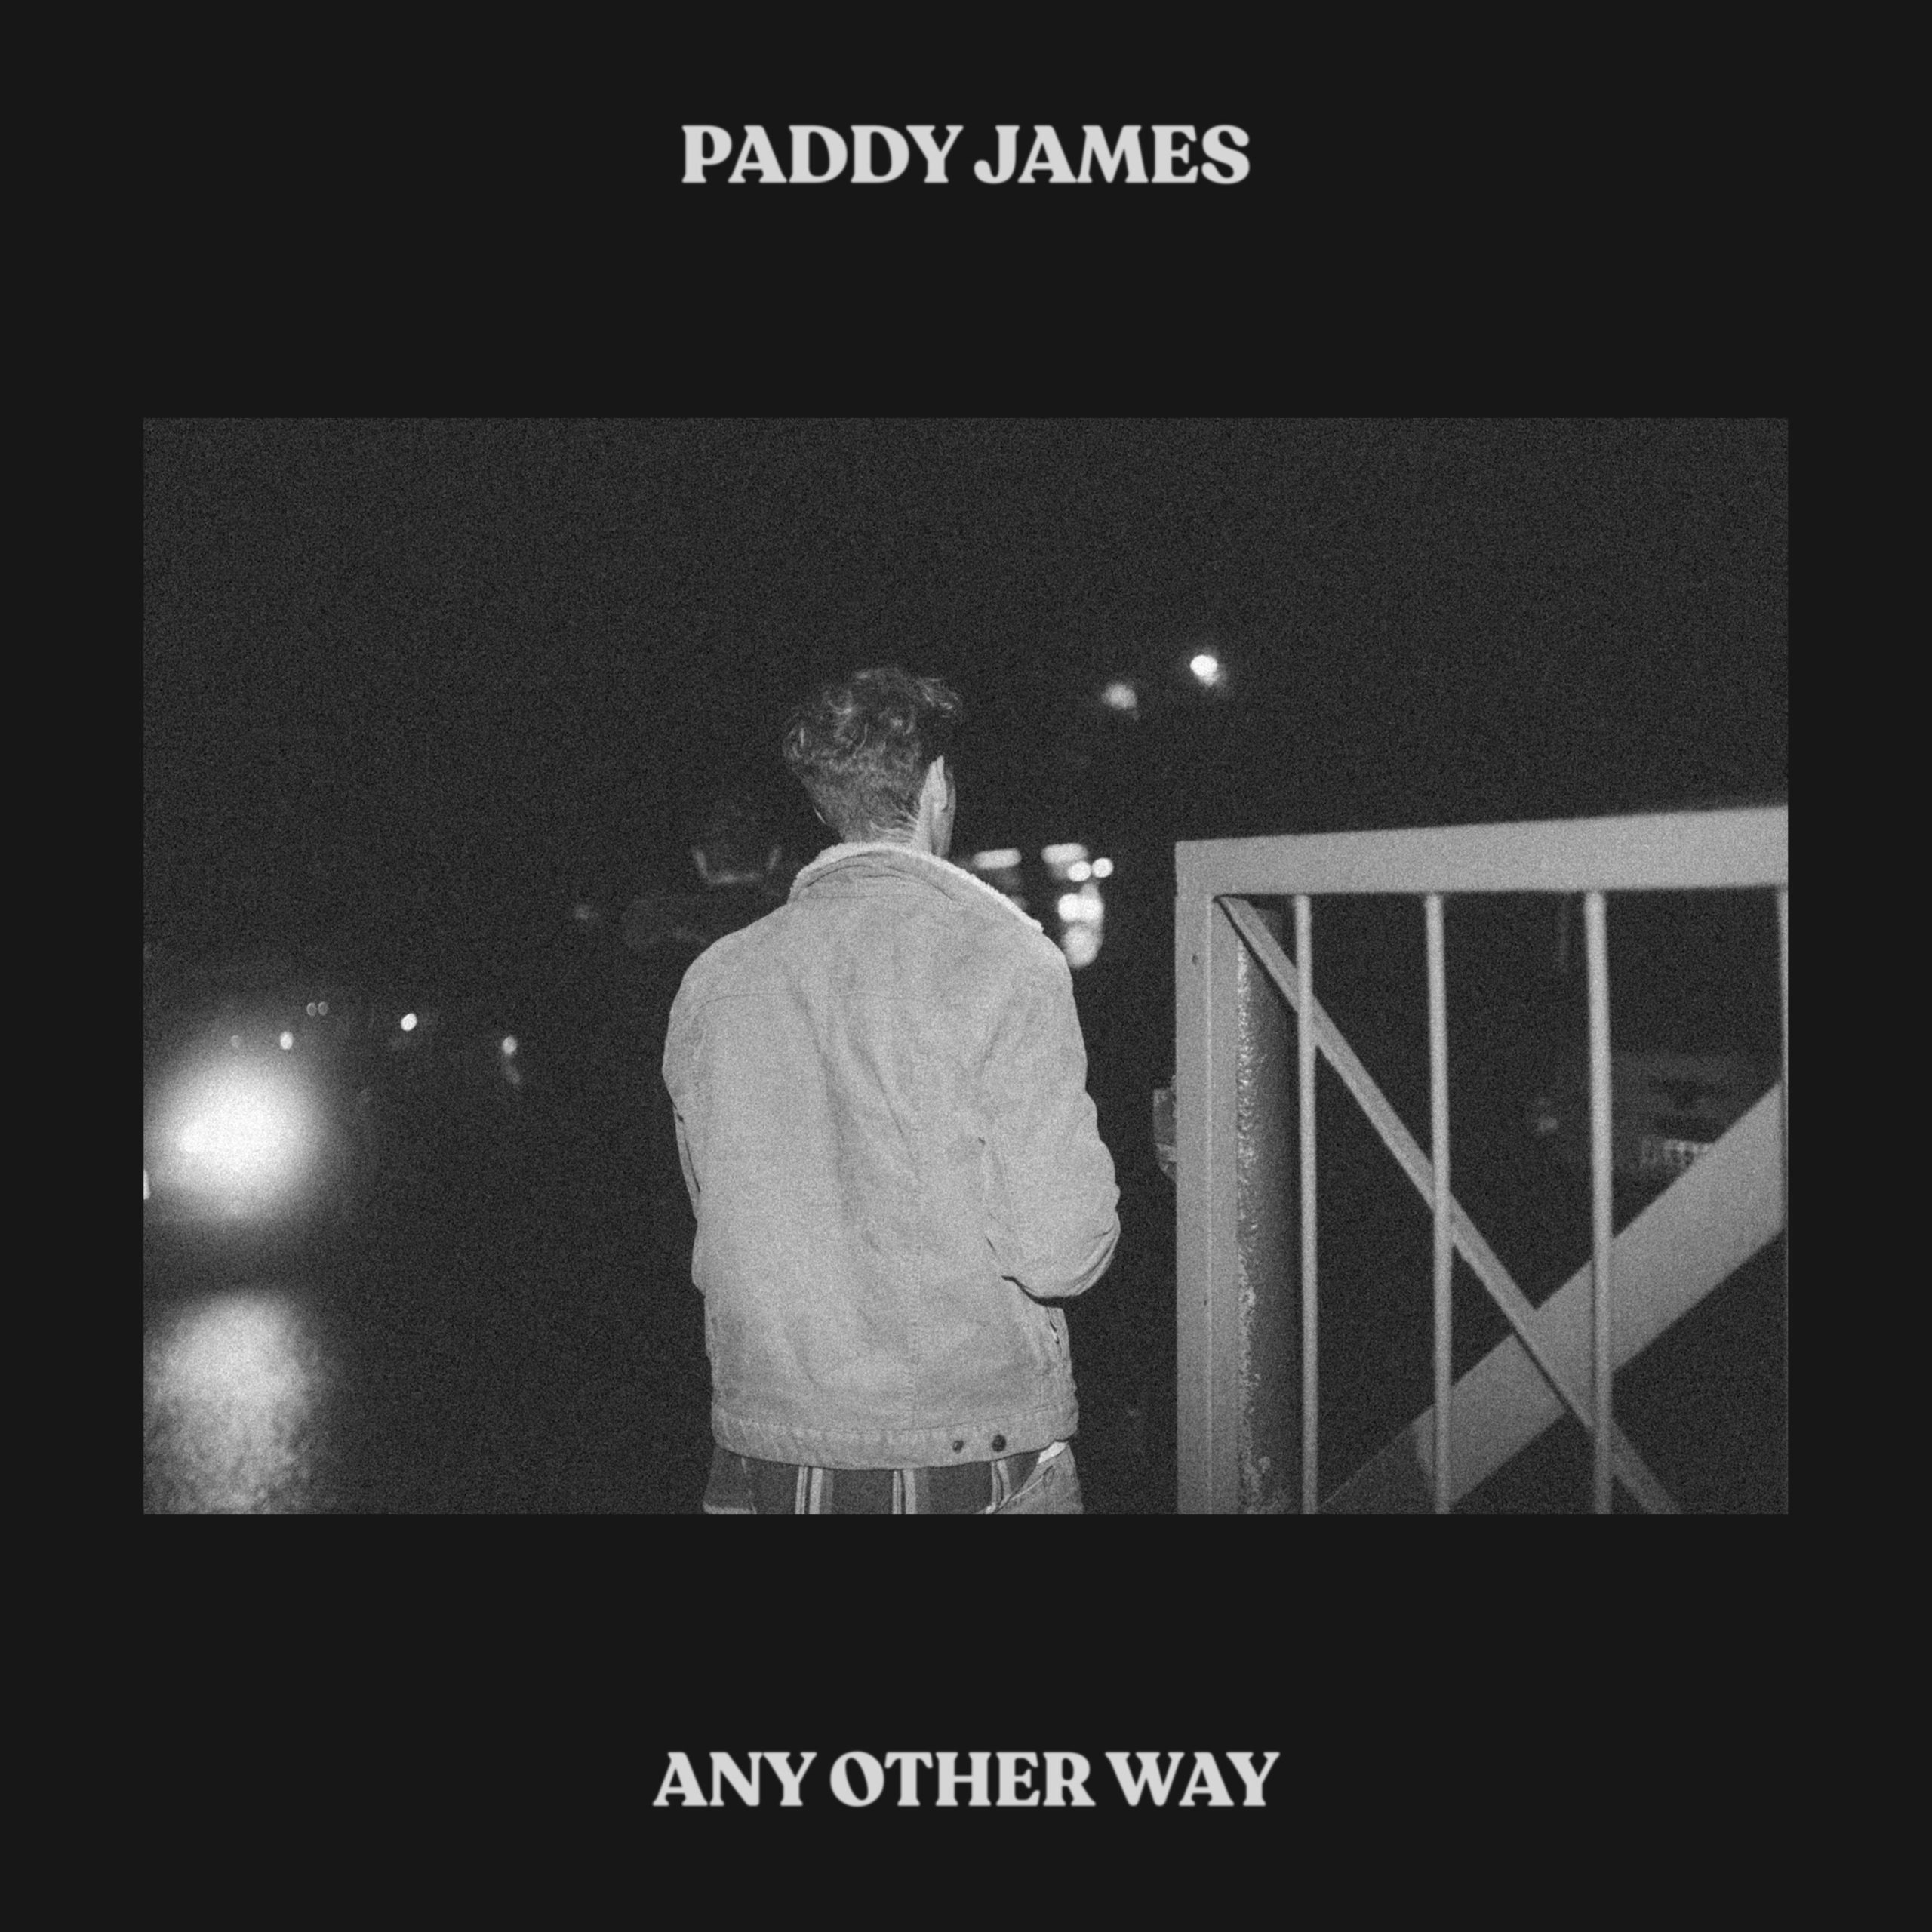 any other way - paddy james - uk - indie music - indie rock - new music - music blog - indie blog - wolf in a suit - wolfinasuit - wolf in a suit blog - wolf in a suit music blog